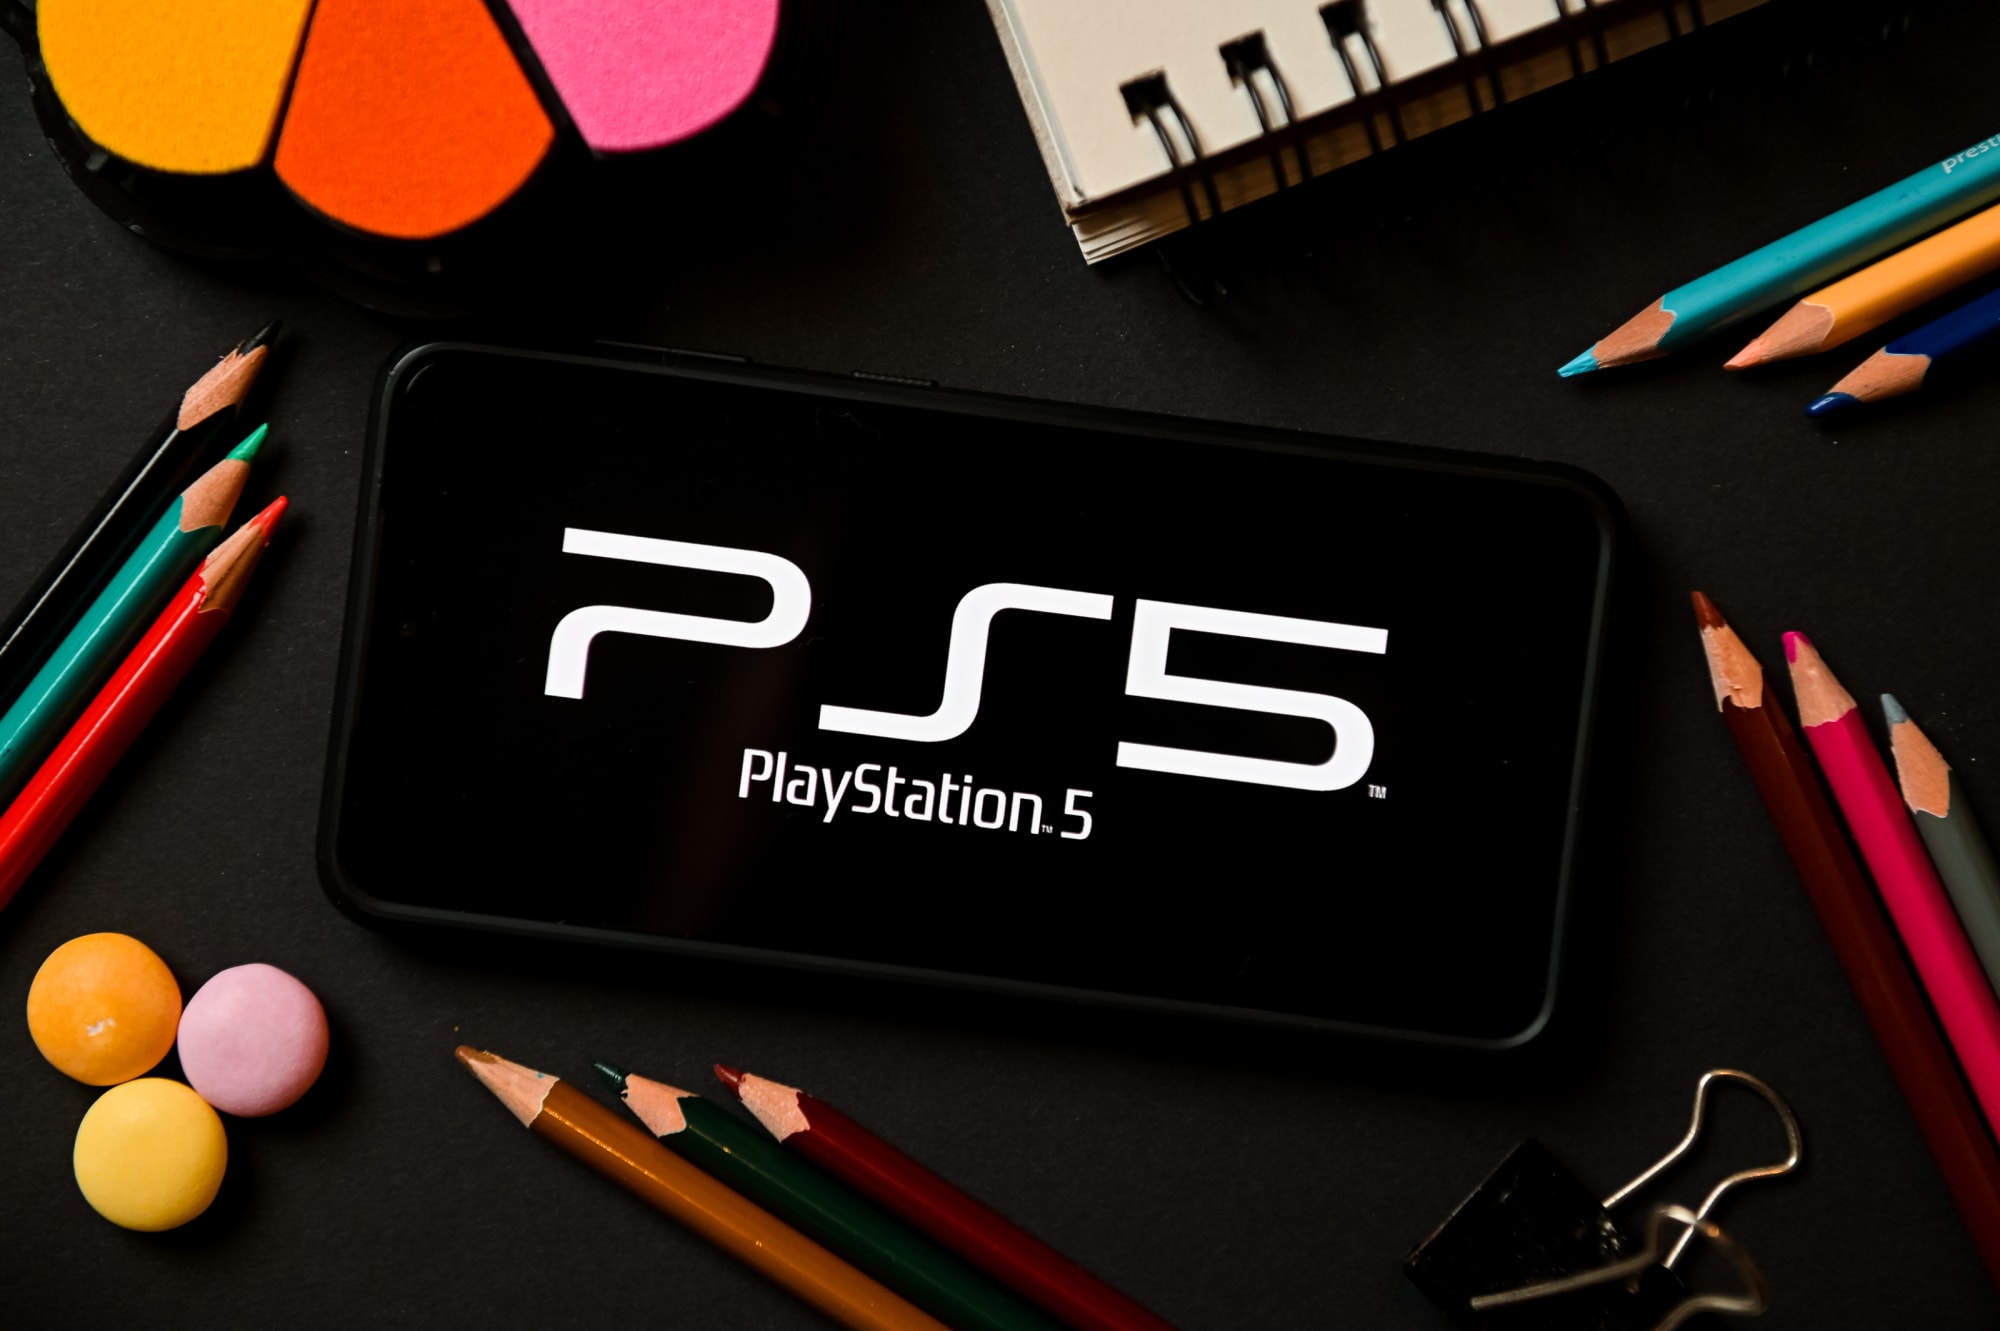 PS5 Pro in development, possible 2024 release according to new report